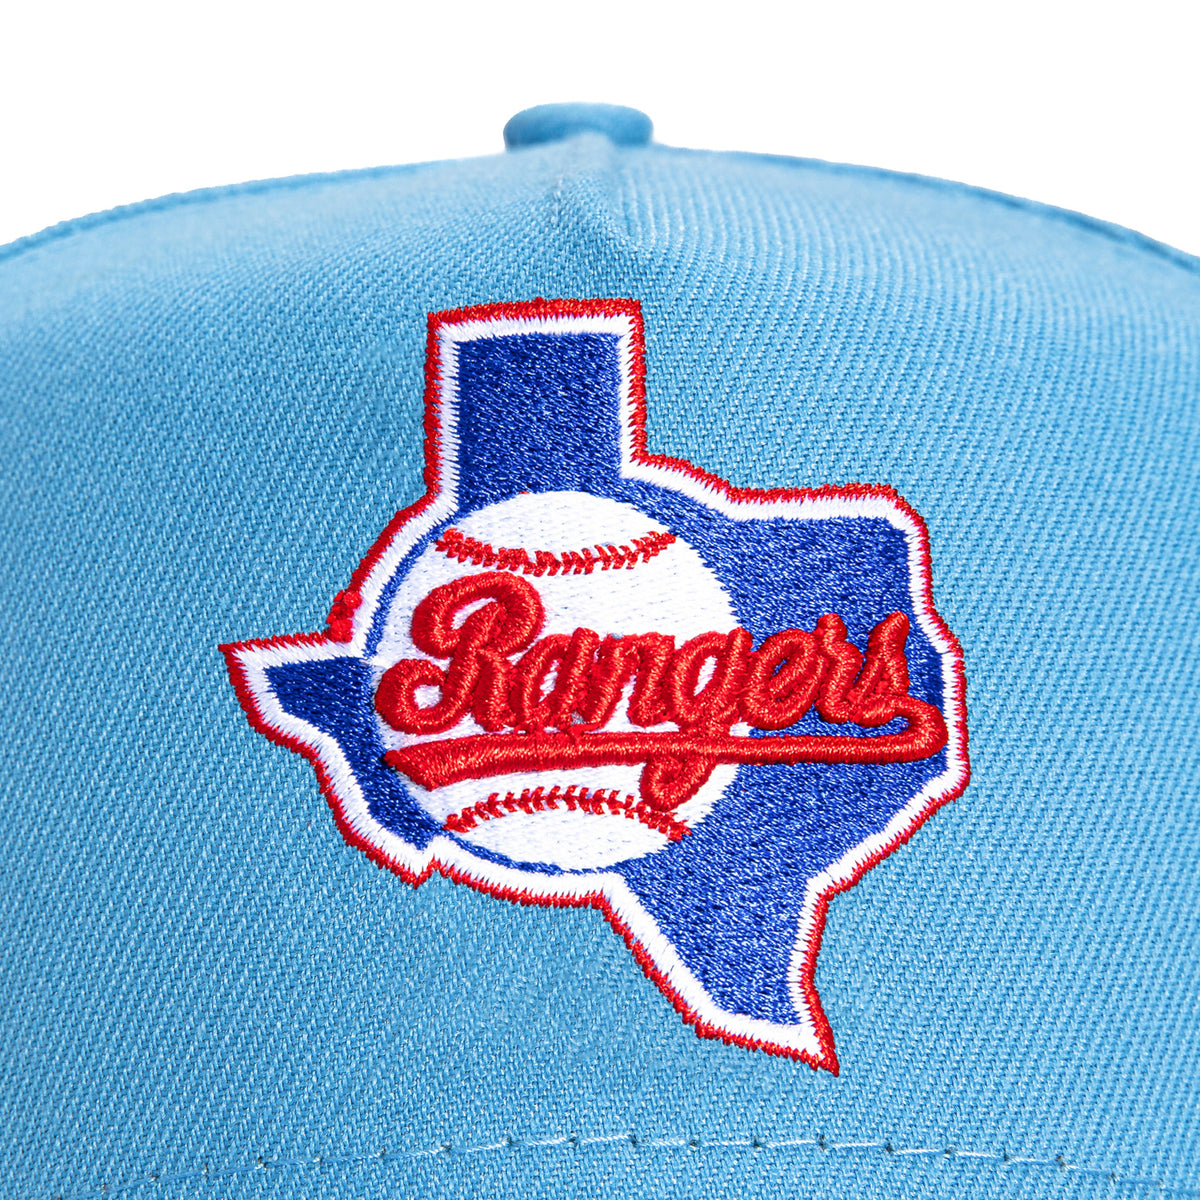 https://www.thewatchoutlets.shop/wp-content/uploads/1691/15/we-can-offer-new-era-9forty-a-frame-texas-rangers-snapback-hat-light-blue-new-era-at-a-reasonable-price_2.jpg